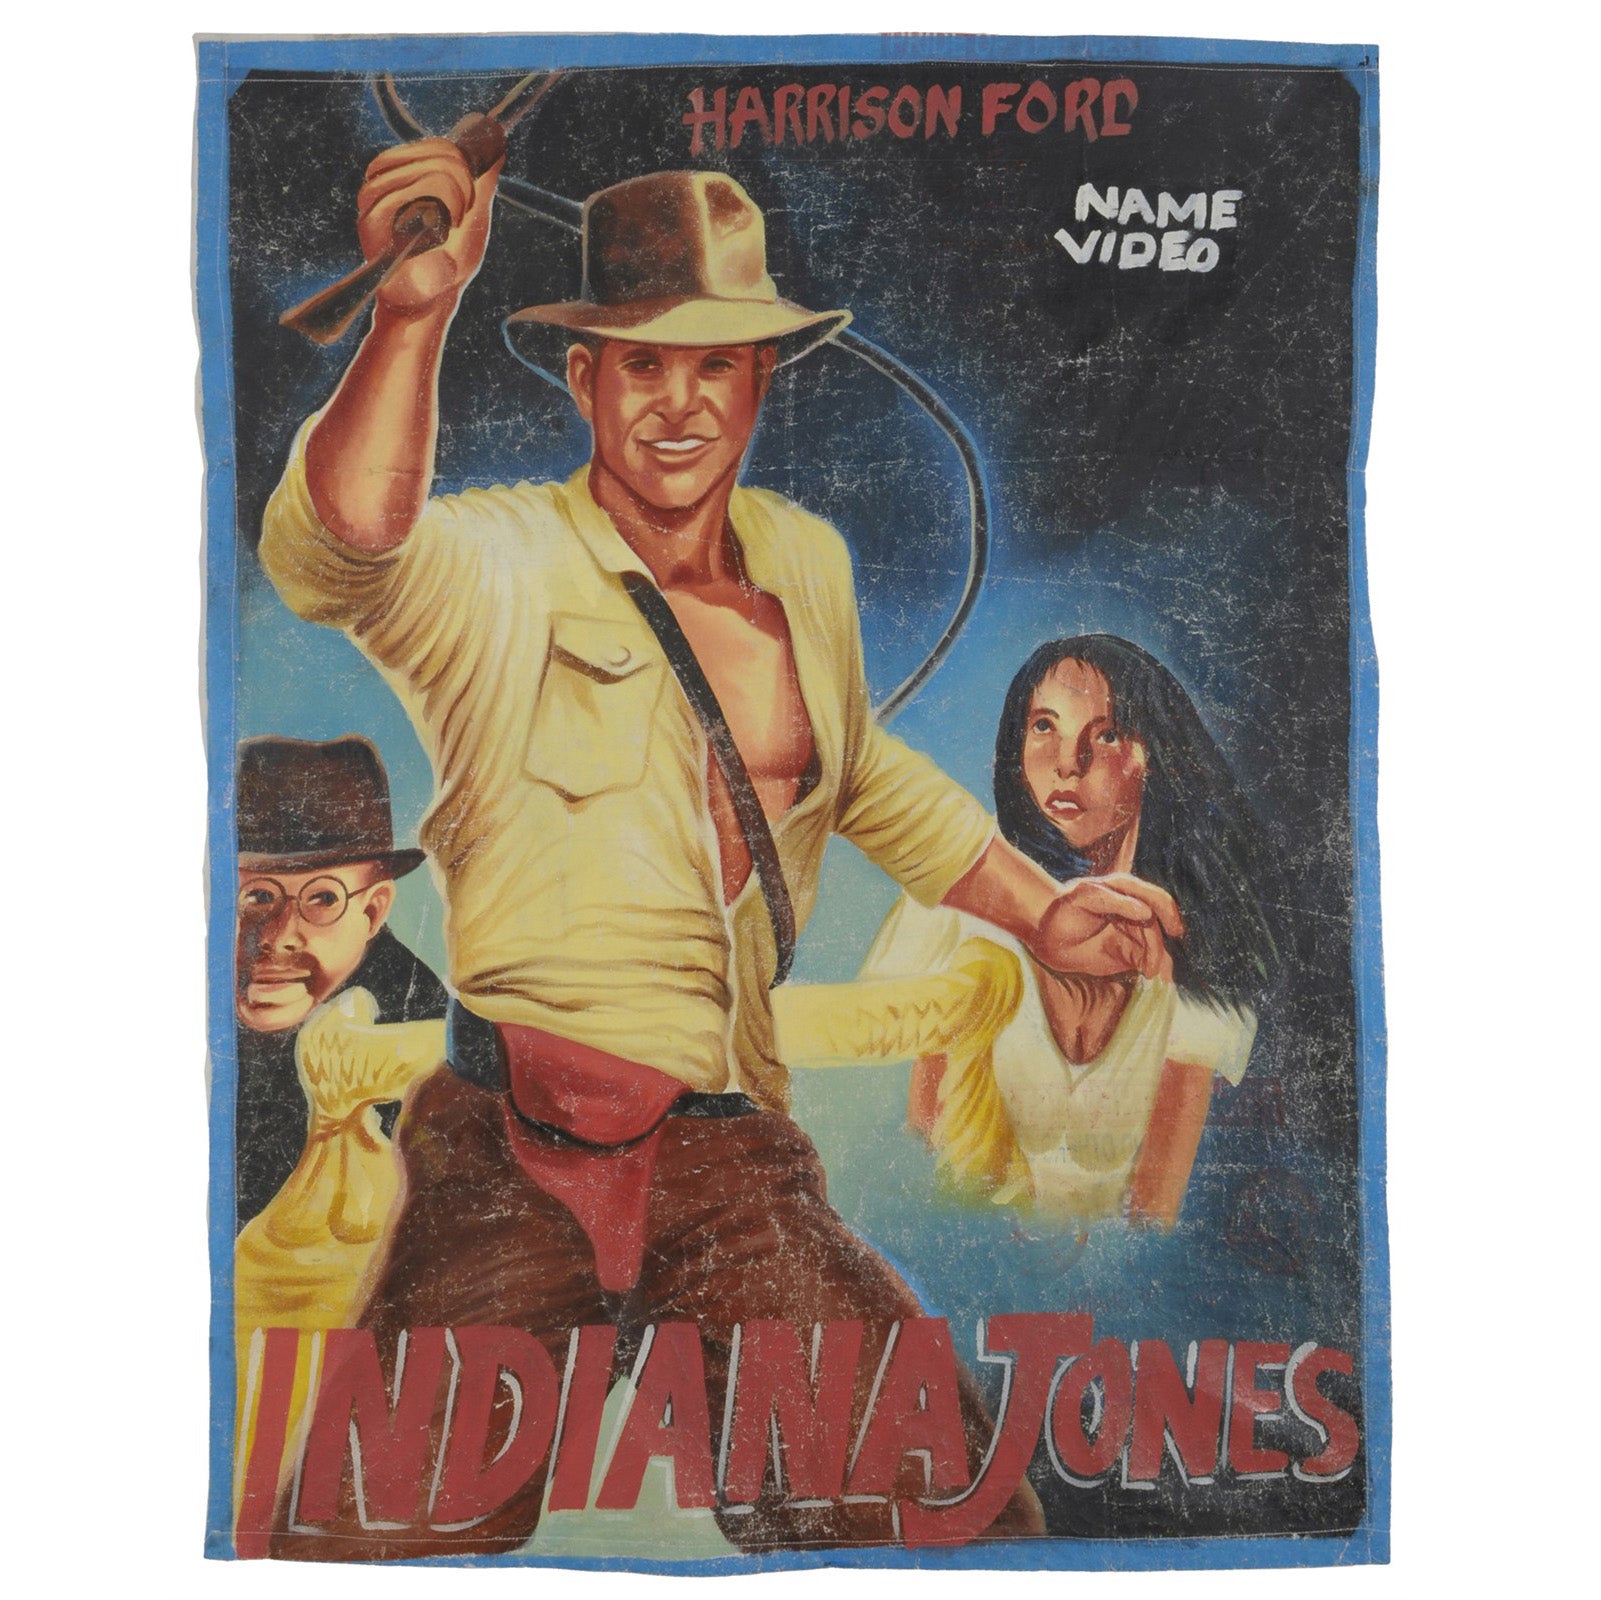 Indiana jones movie poster hand painted in Ghana for the local cinema